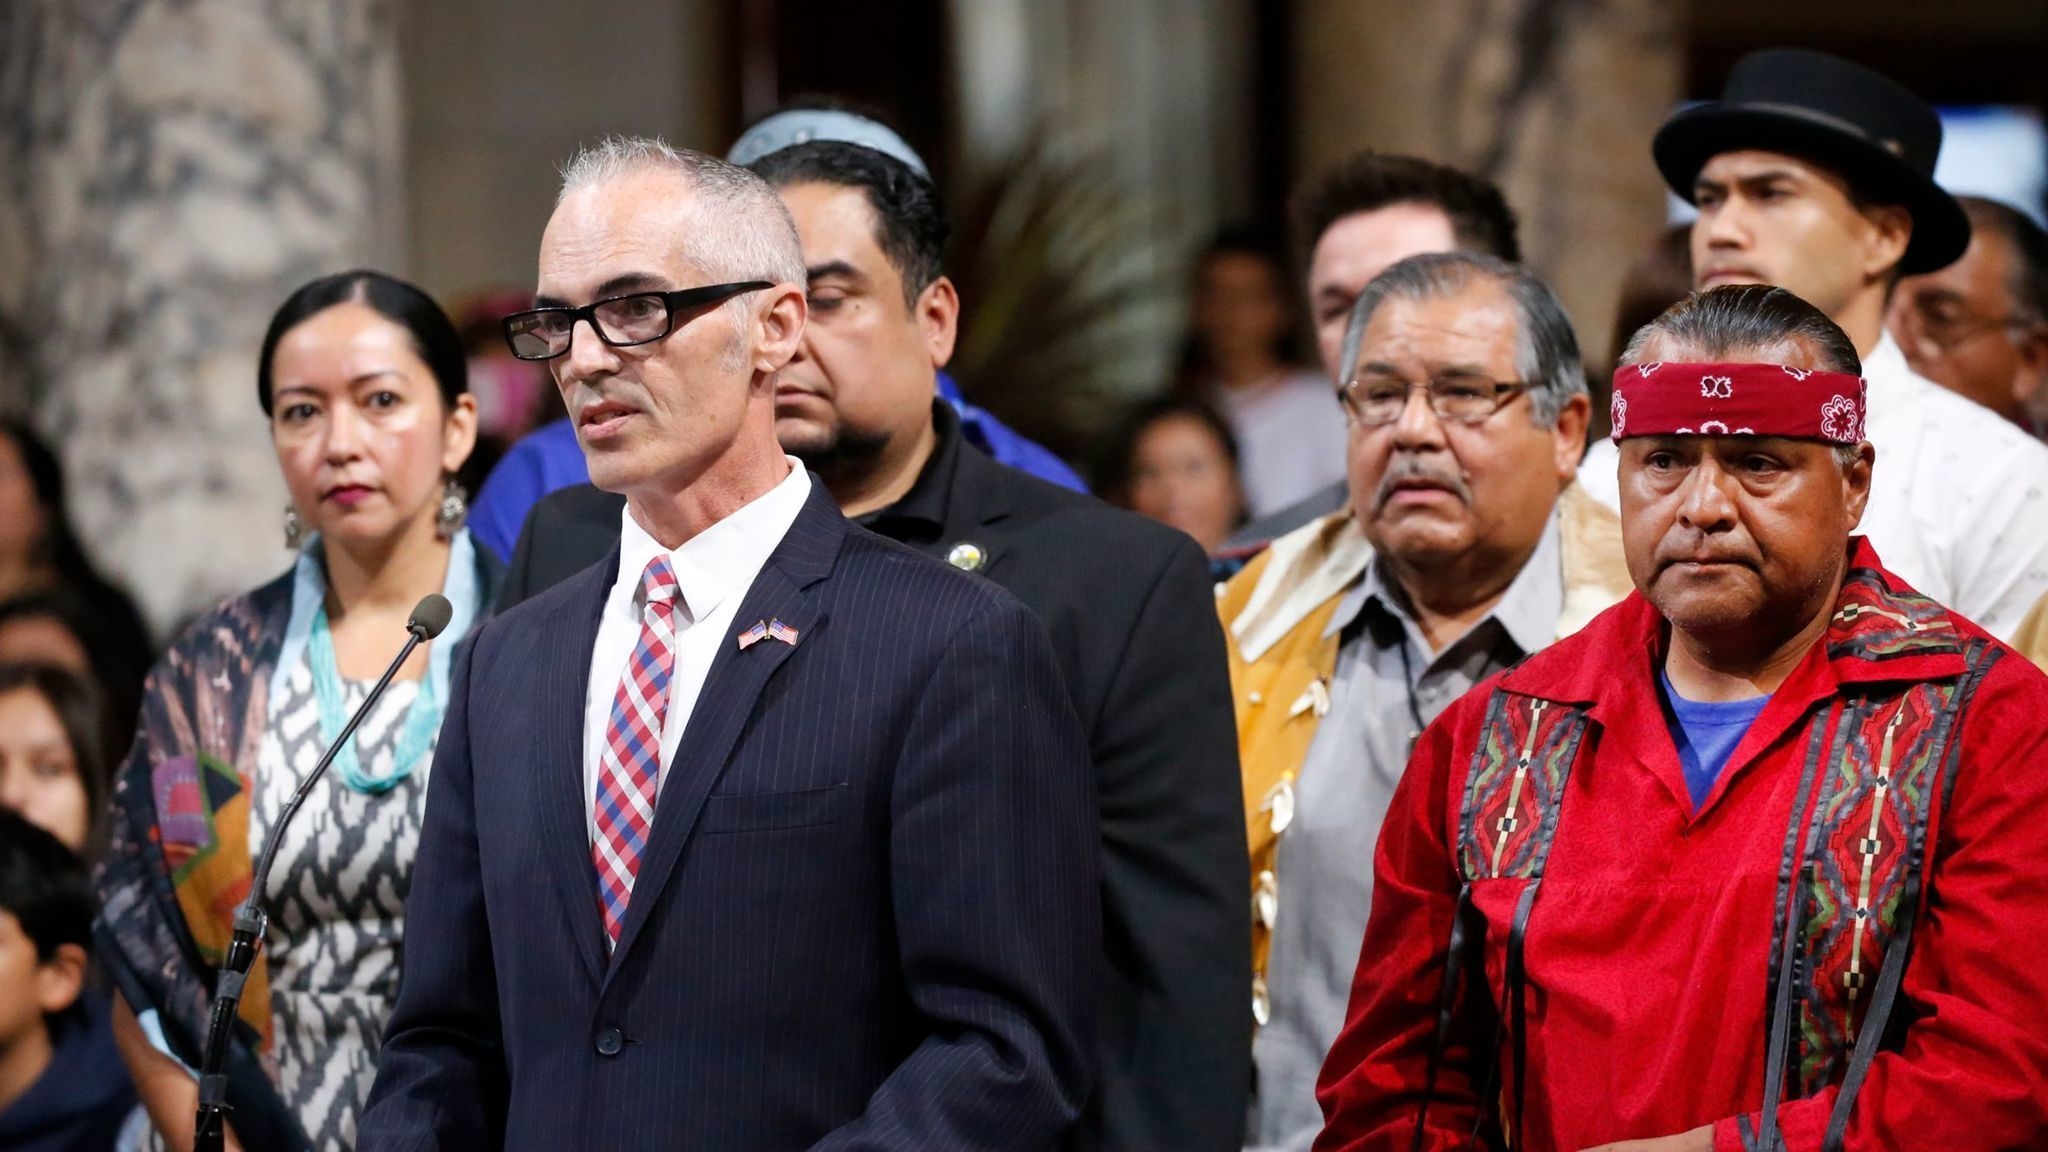 LA City Council votes to replace Columbus Day with Indigenous Peoples Day